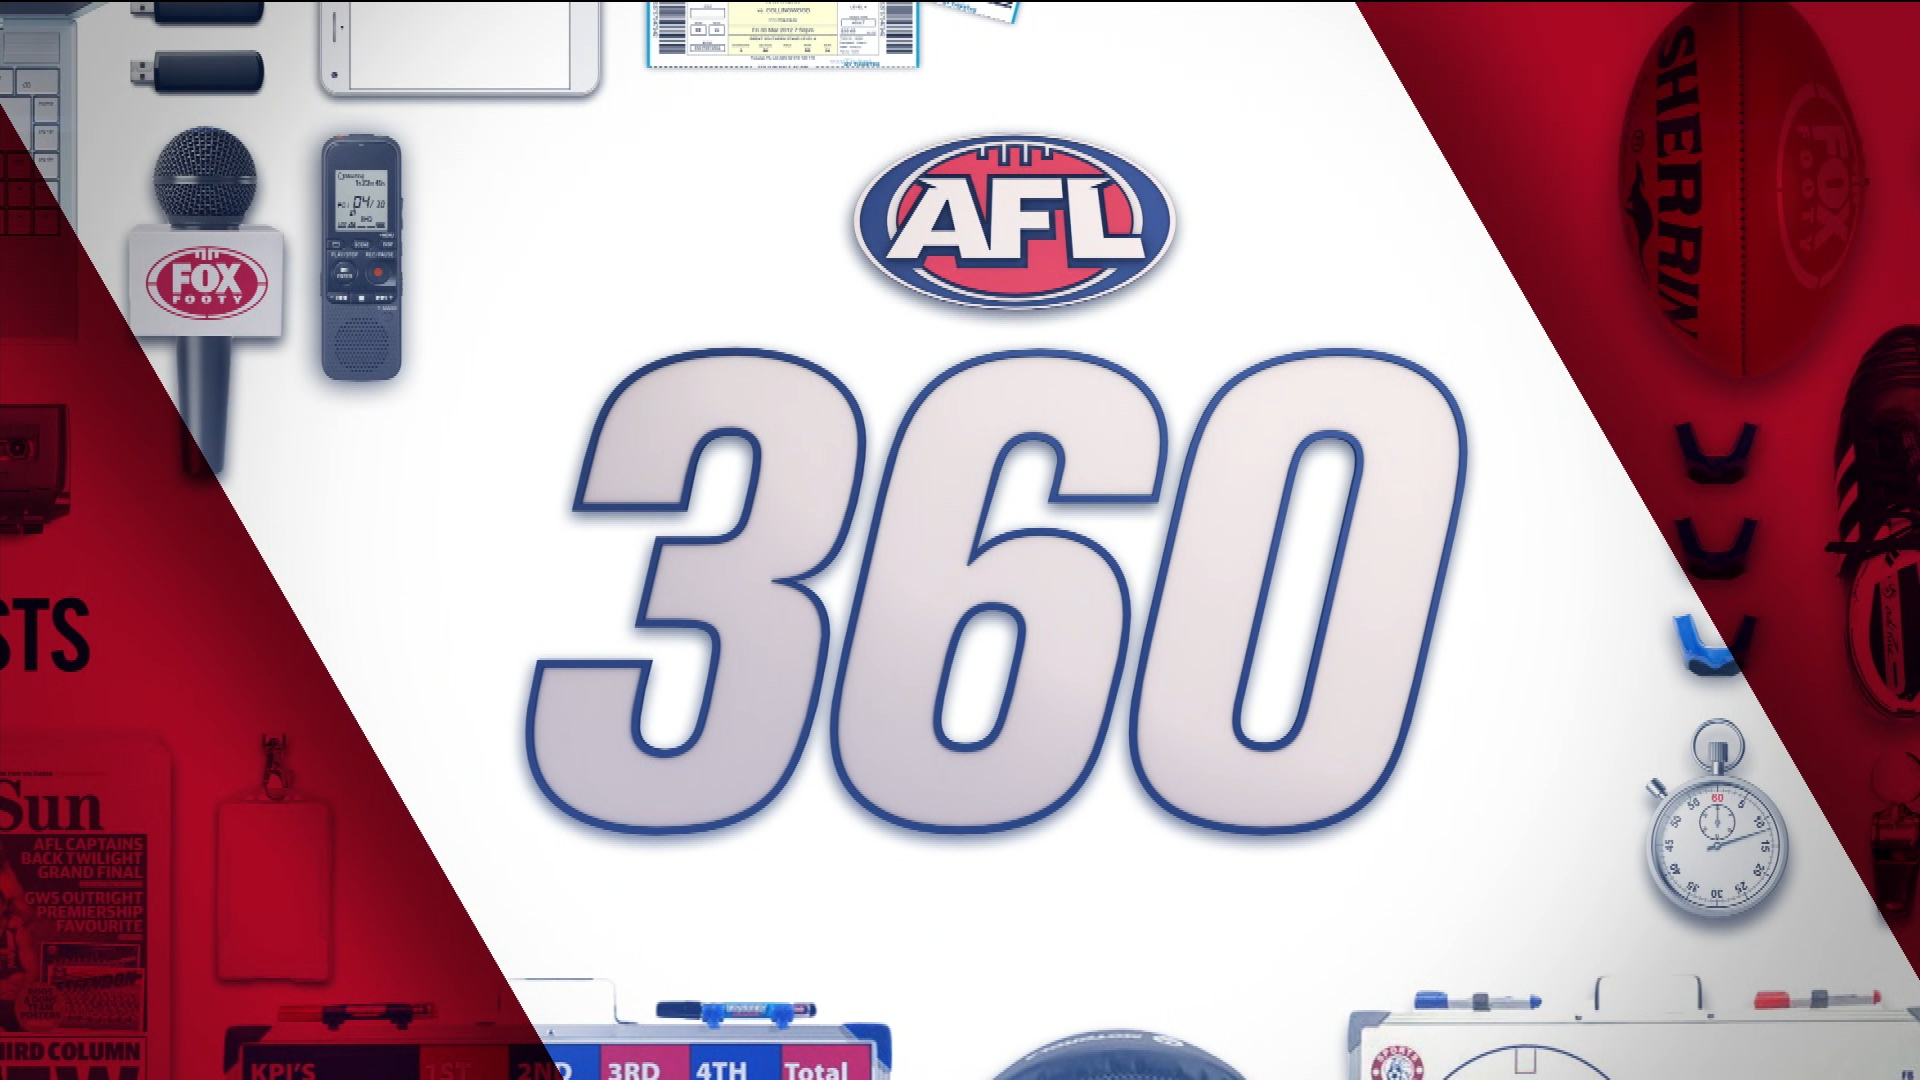 AFL 360 - Buddy back for one more year! Callum Mills joins and Phil Davis to play on as well - 20/09/22